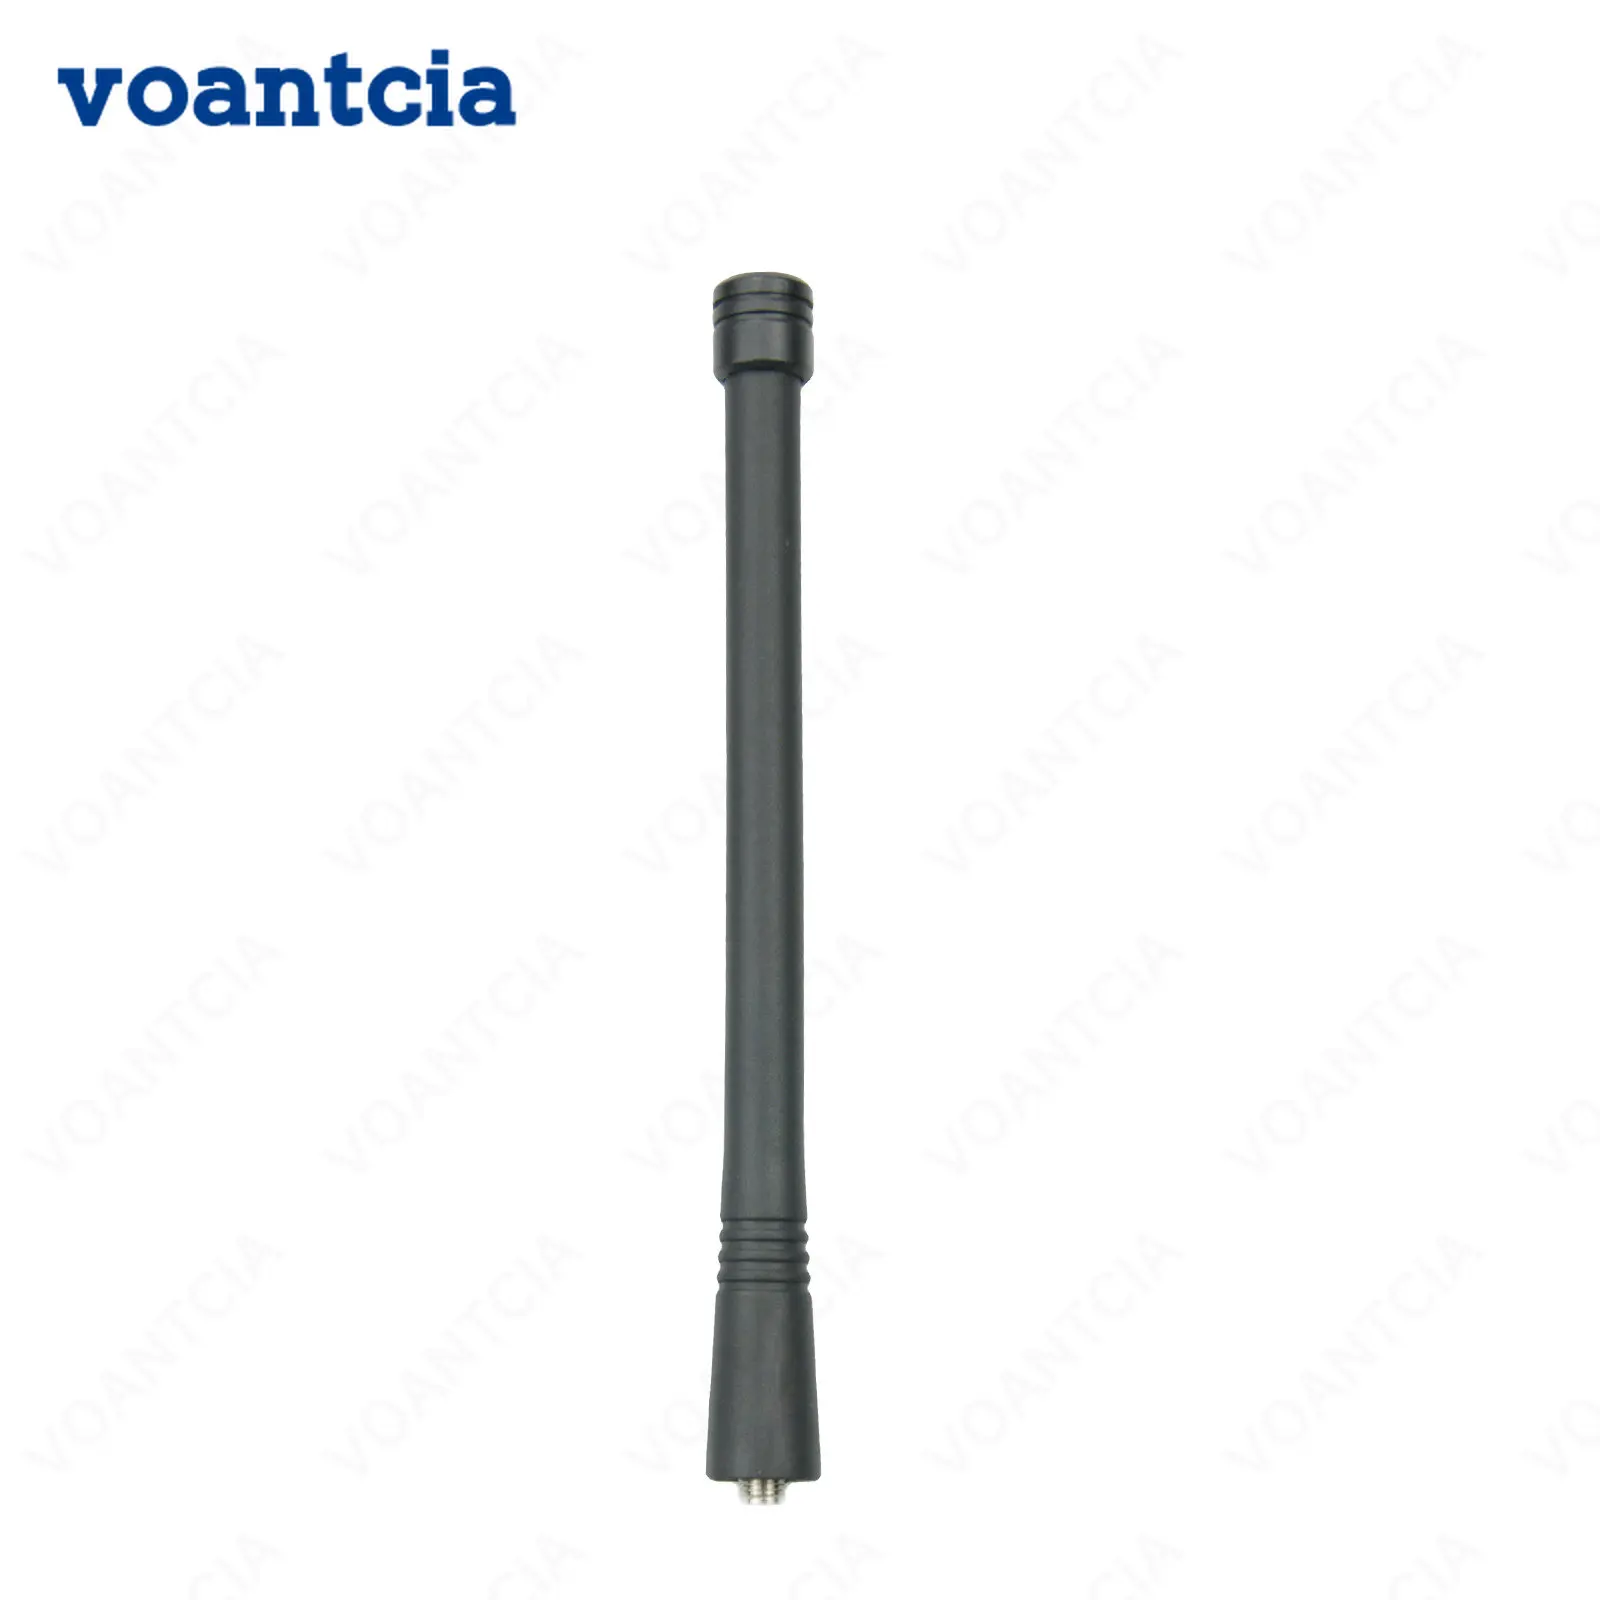 

Replacement 150Mhz Sturdy Long Antenna VHF 136-174Mhz Antenna for Motorola HT1000 MTS2000 Handheld Two Way Radio